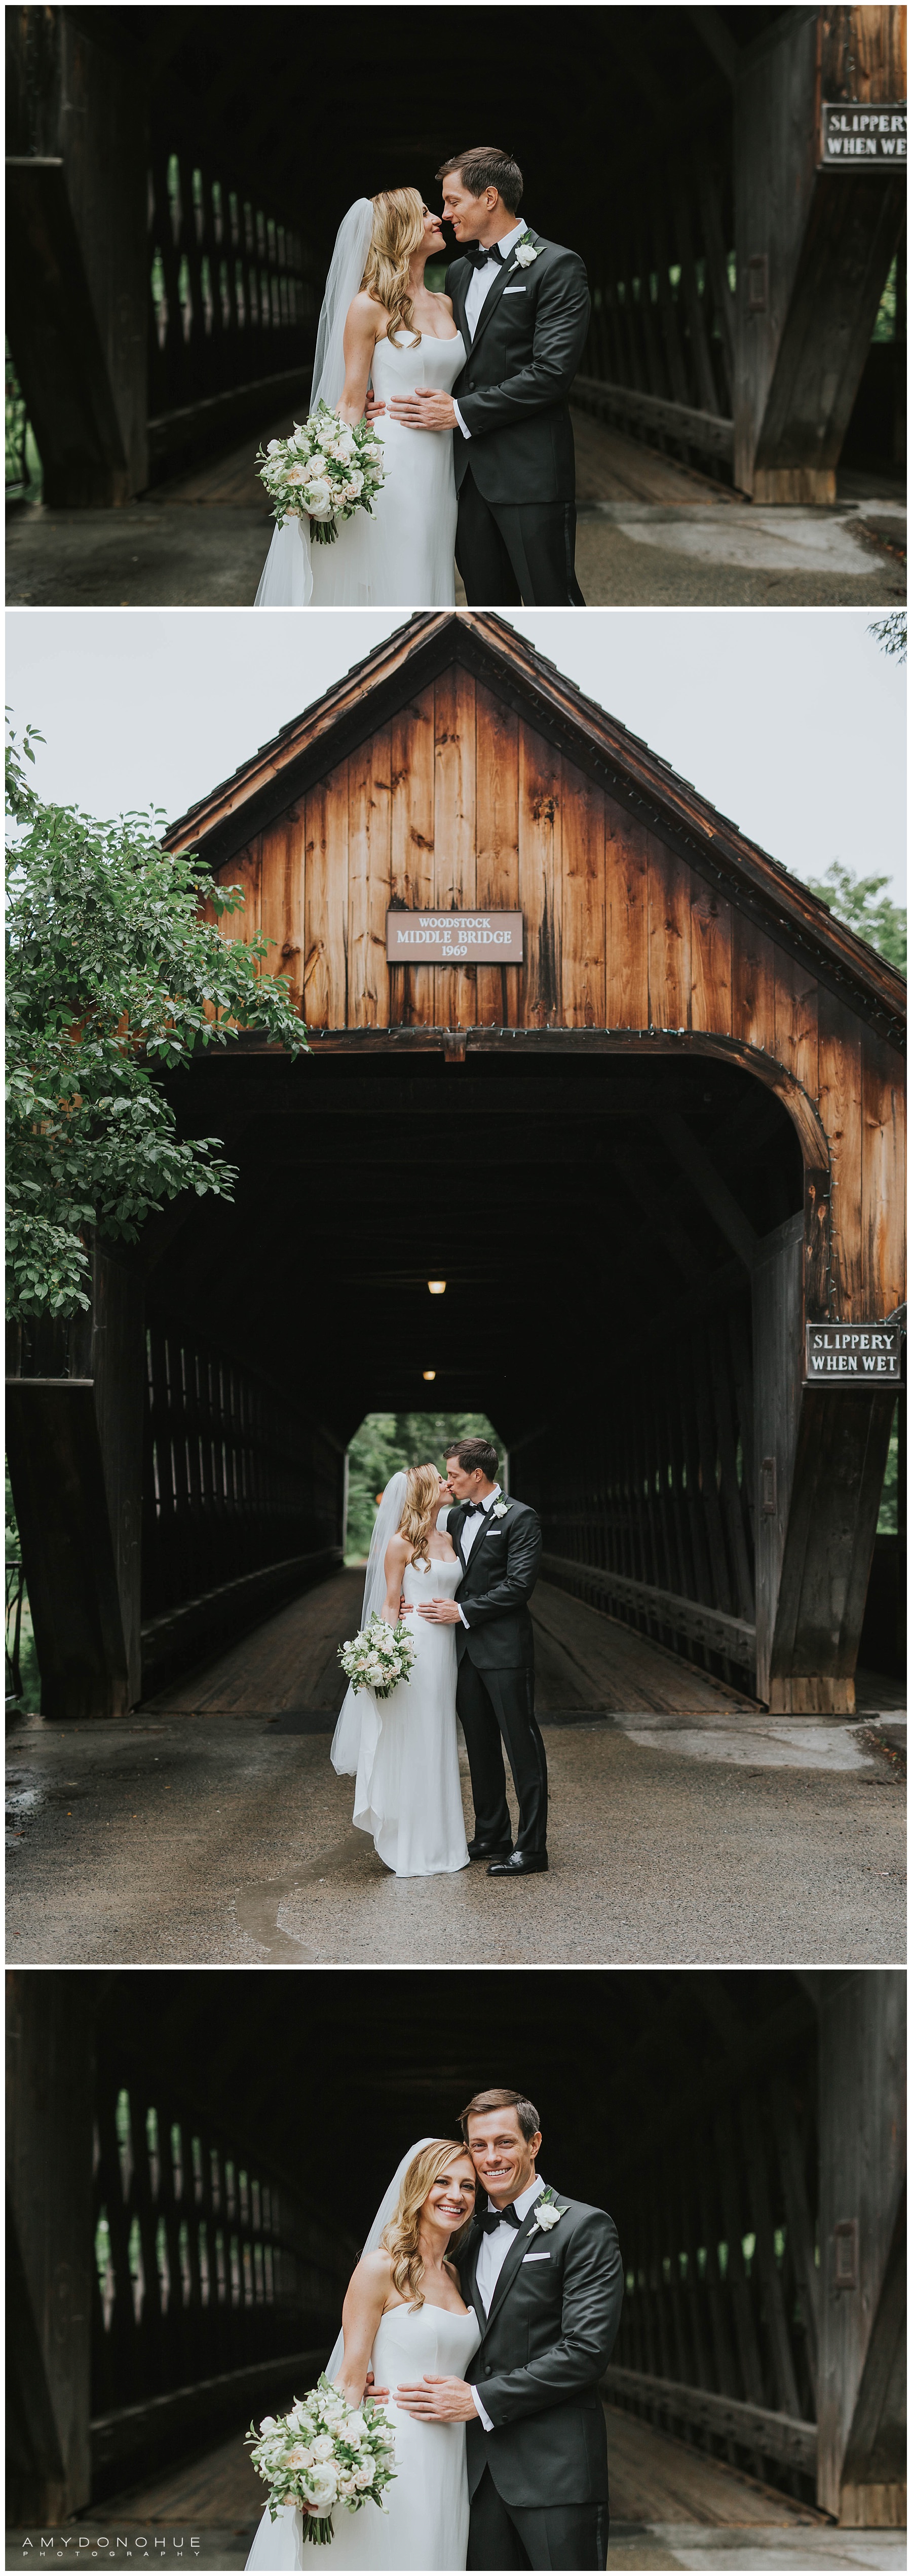 Bride and Groom at the Covered Bridge | © Amy Donohue Photography | Woodstock, Vermont Wedding Photographer